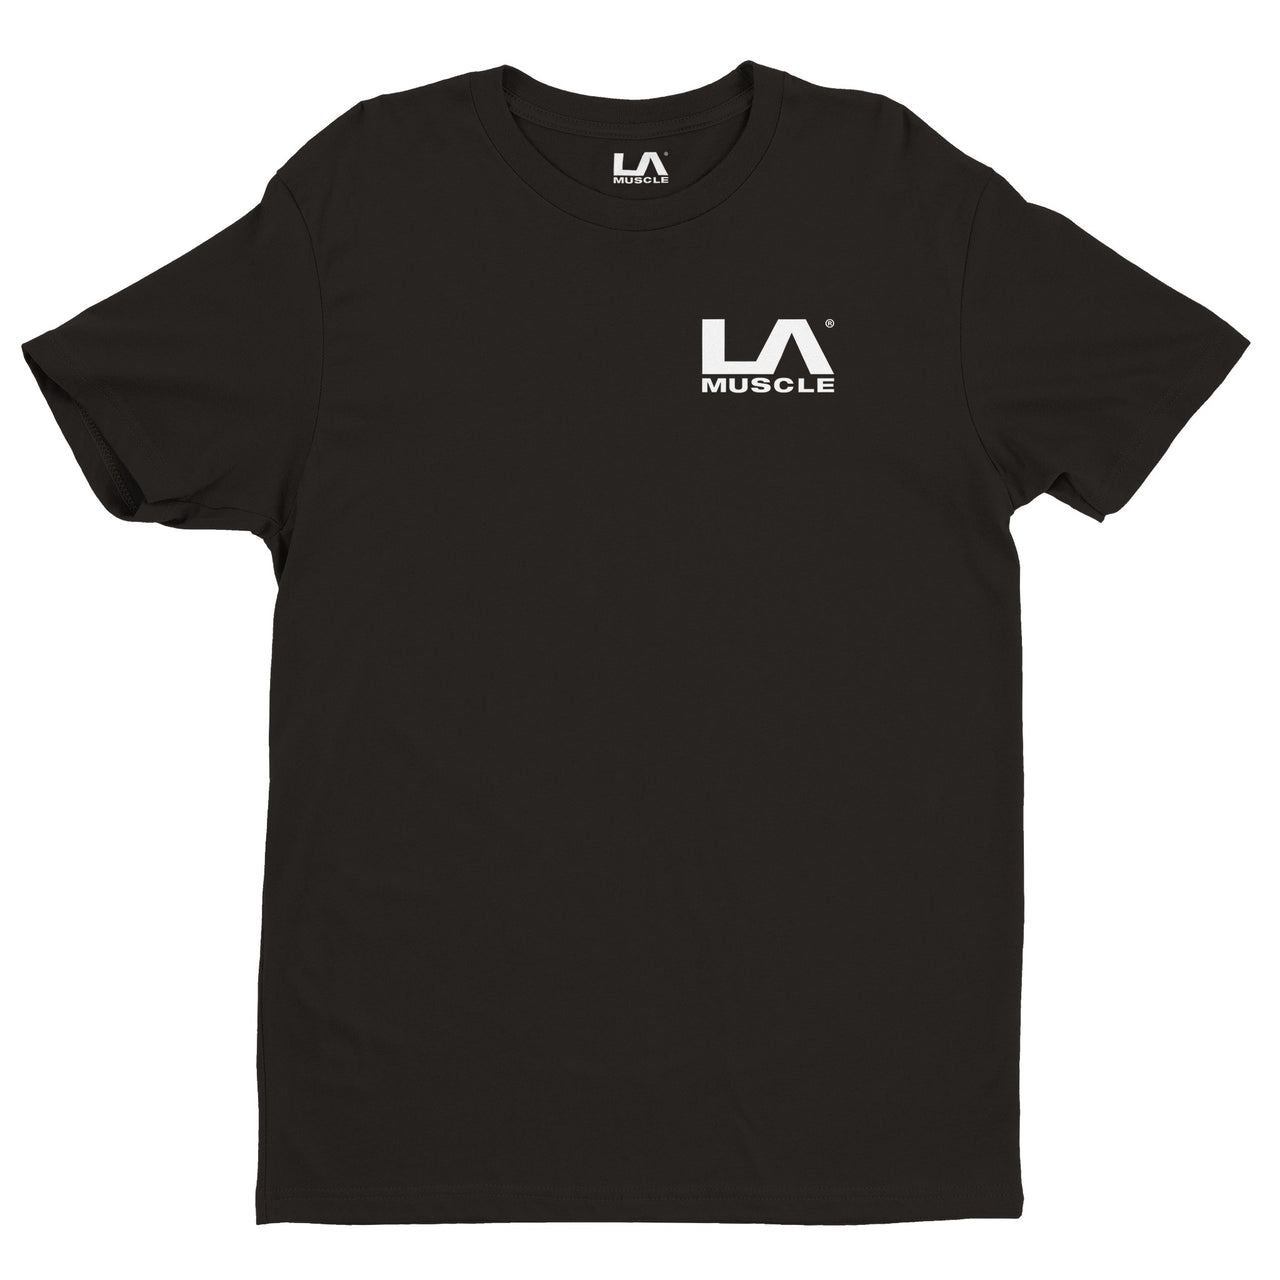 LA MUSCLE® high quality Men's FITTED T-Shirt | Next Level 3600